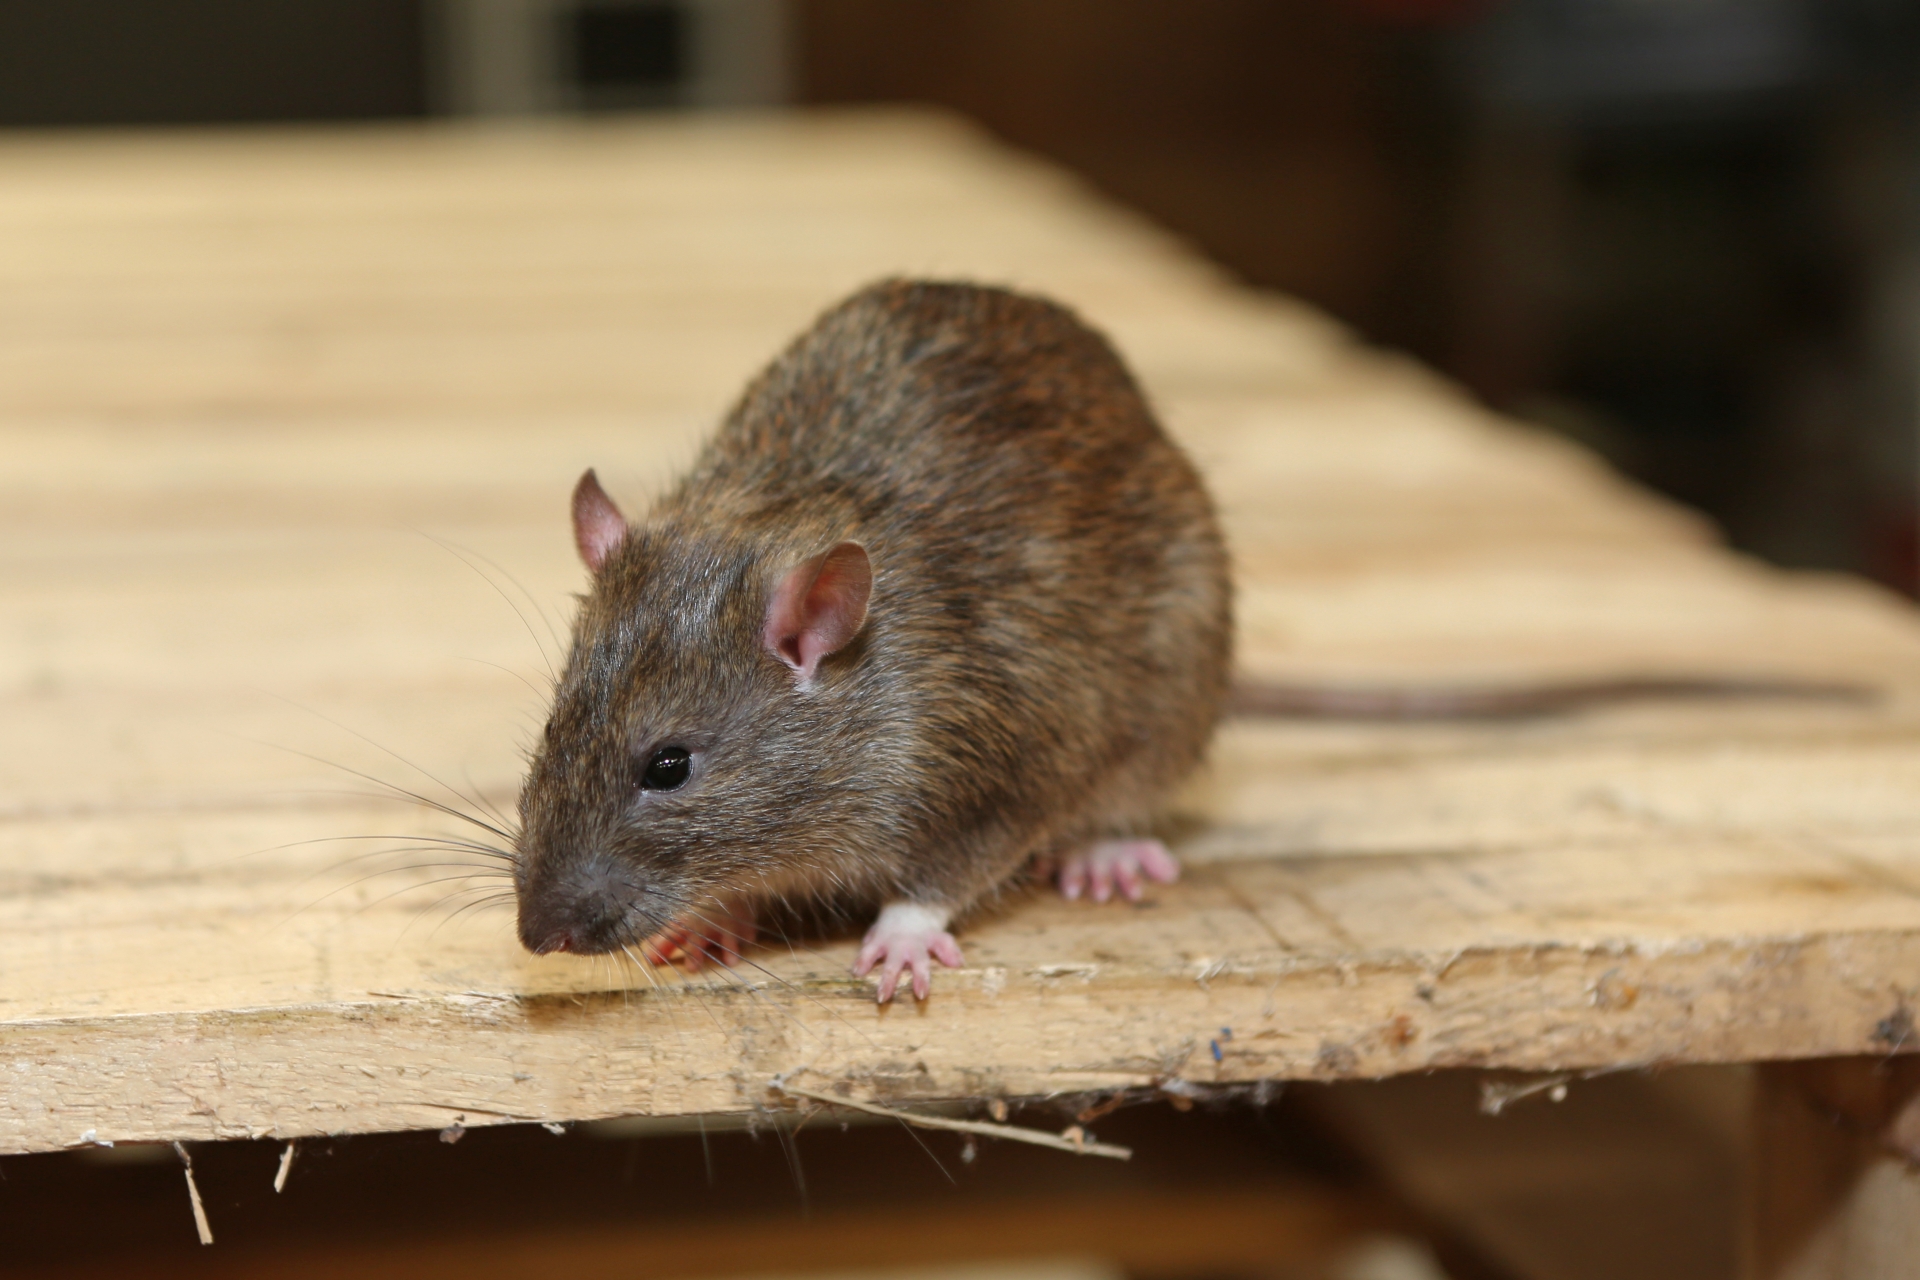 Rat extermination, Pest Control in Leytonstone, E11. Call Now 020 8166 9746